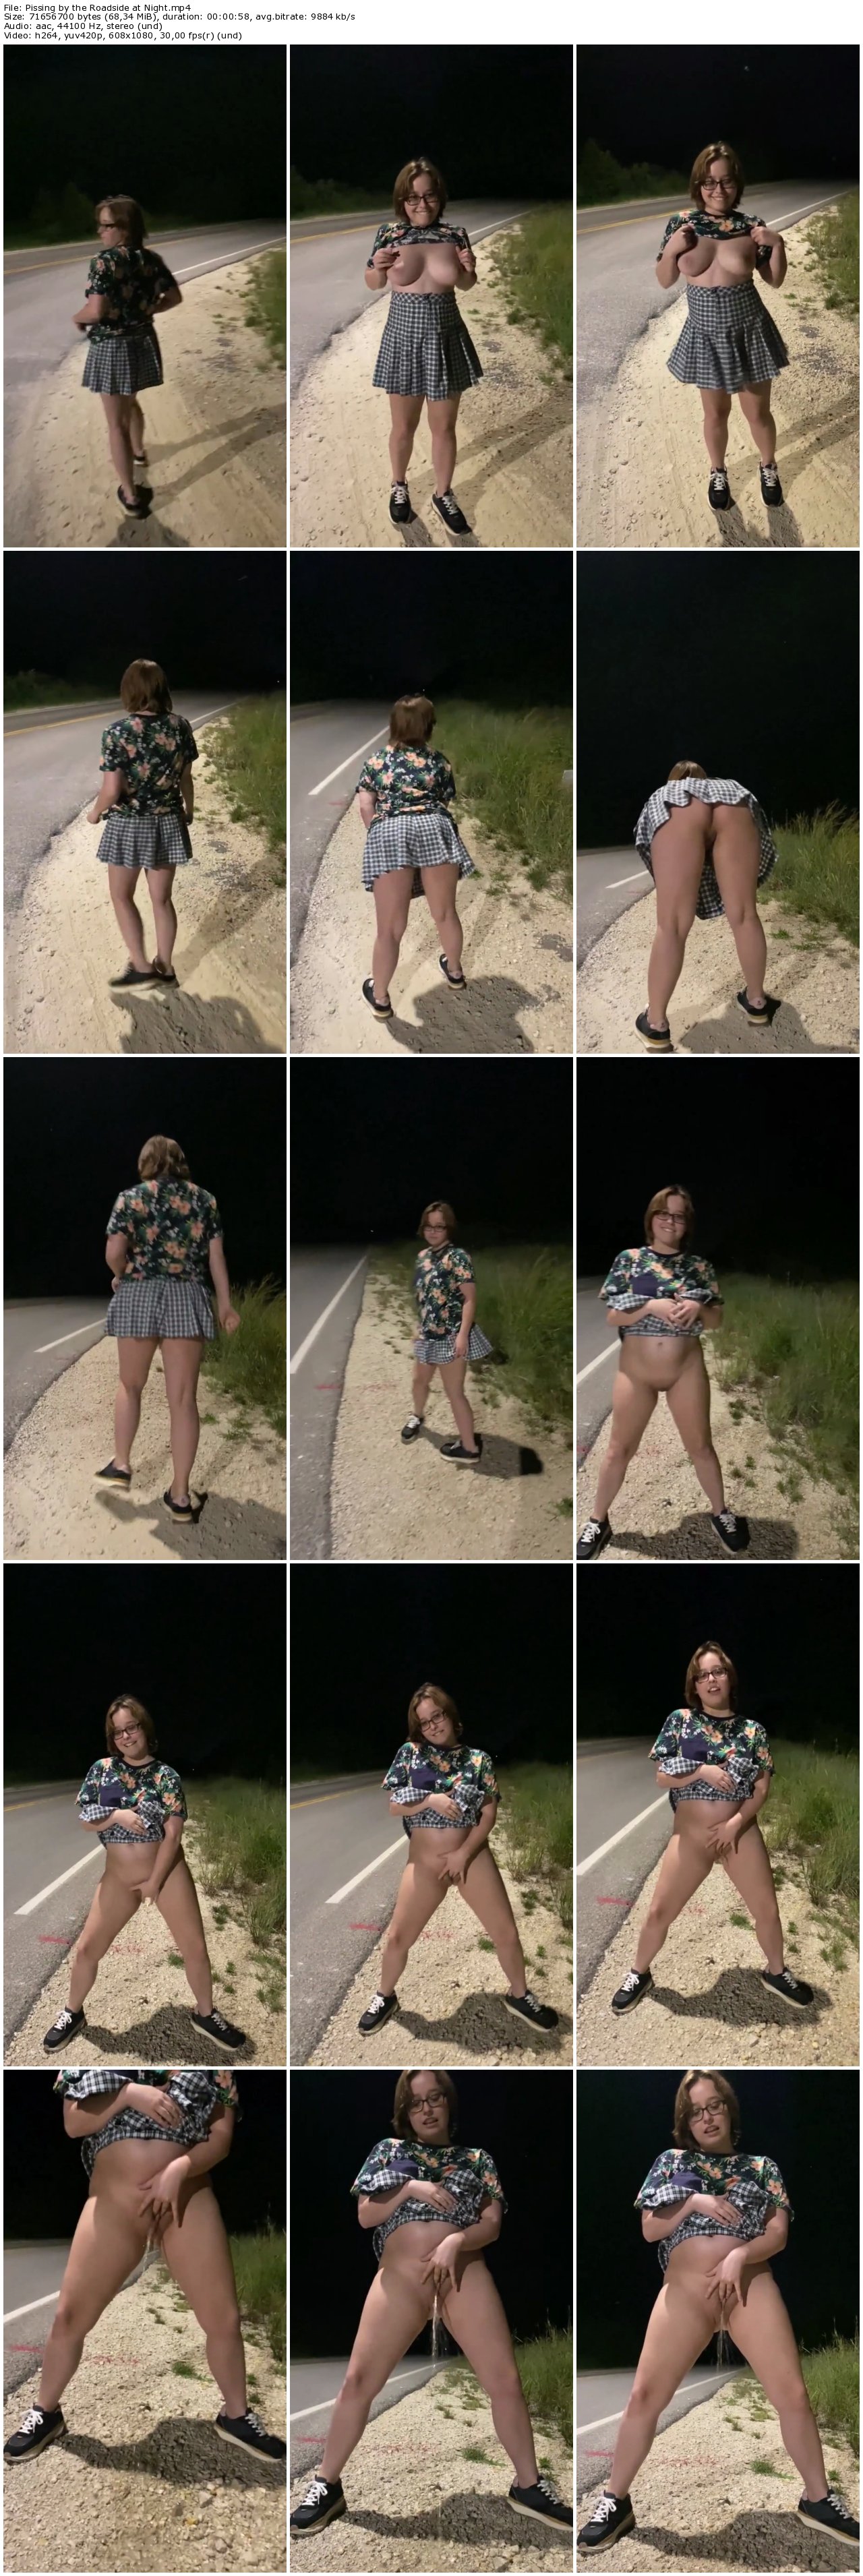 Pissing by the Roadside at Night_thumb.jpg